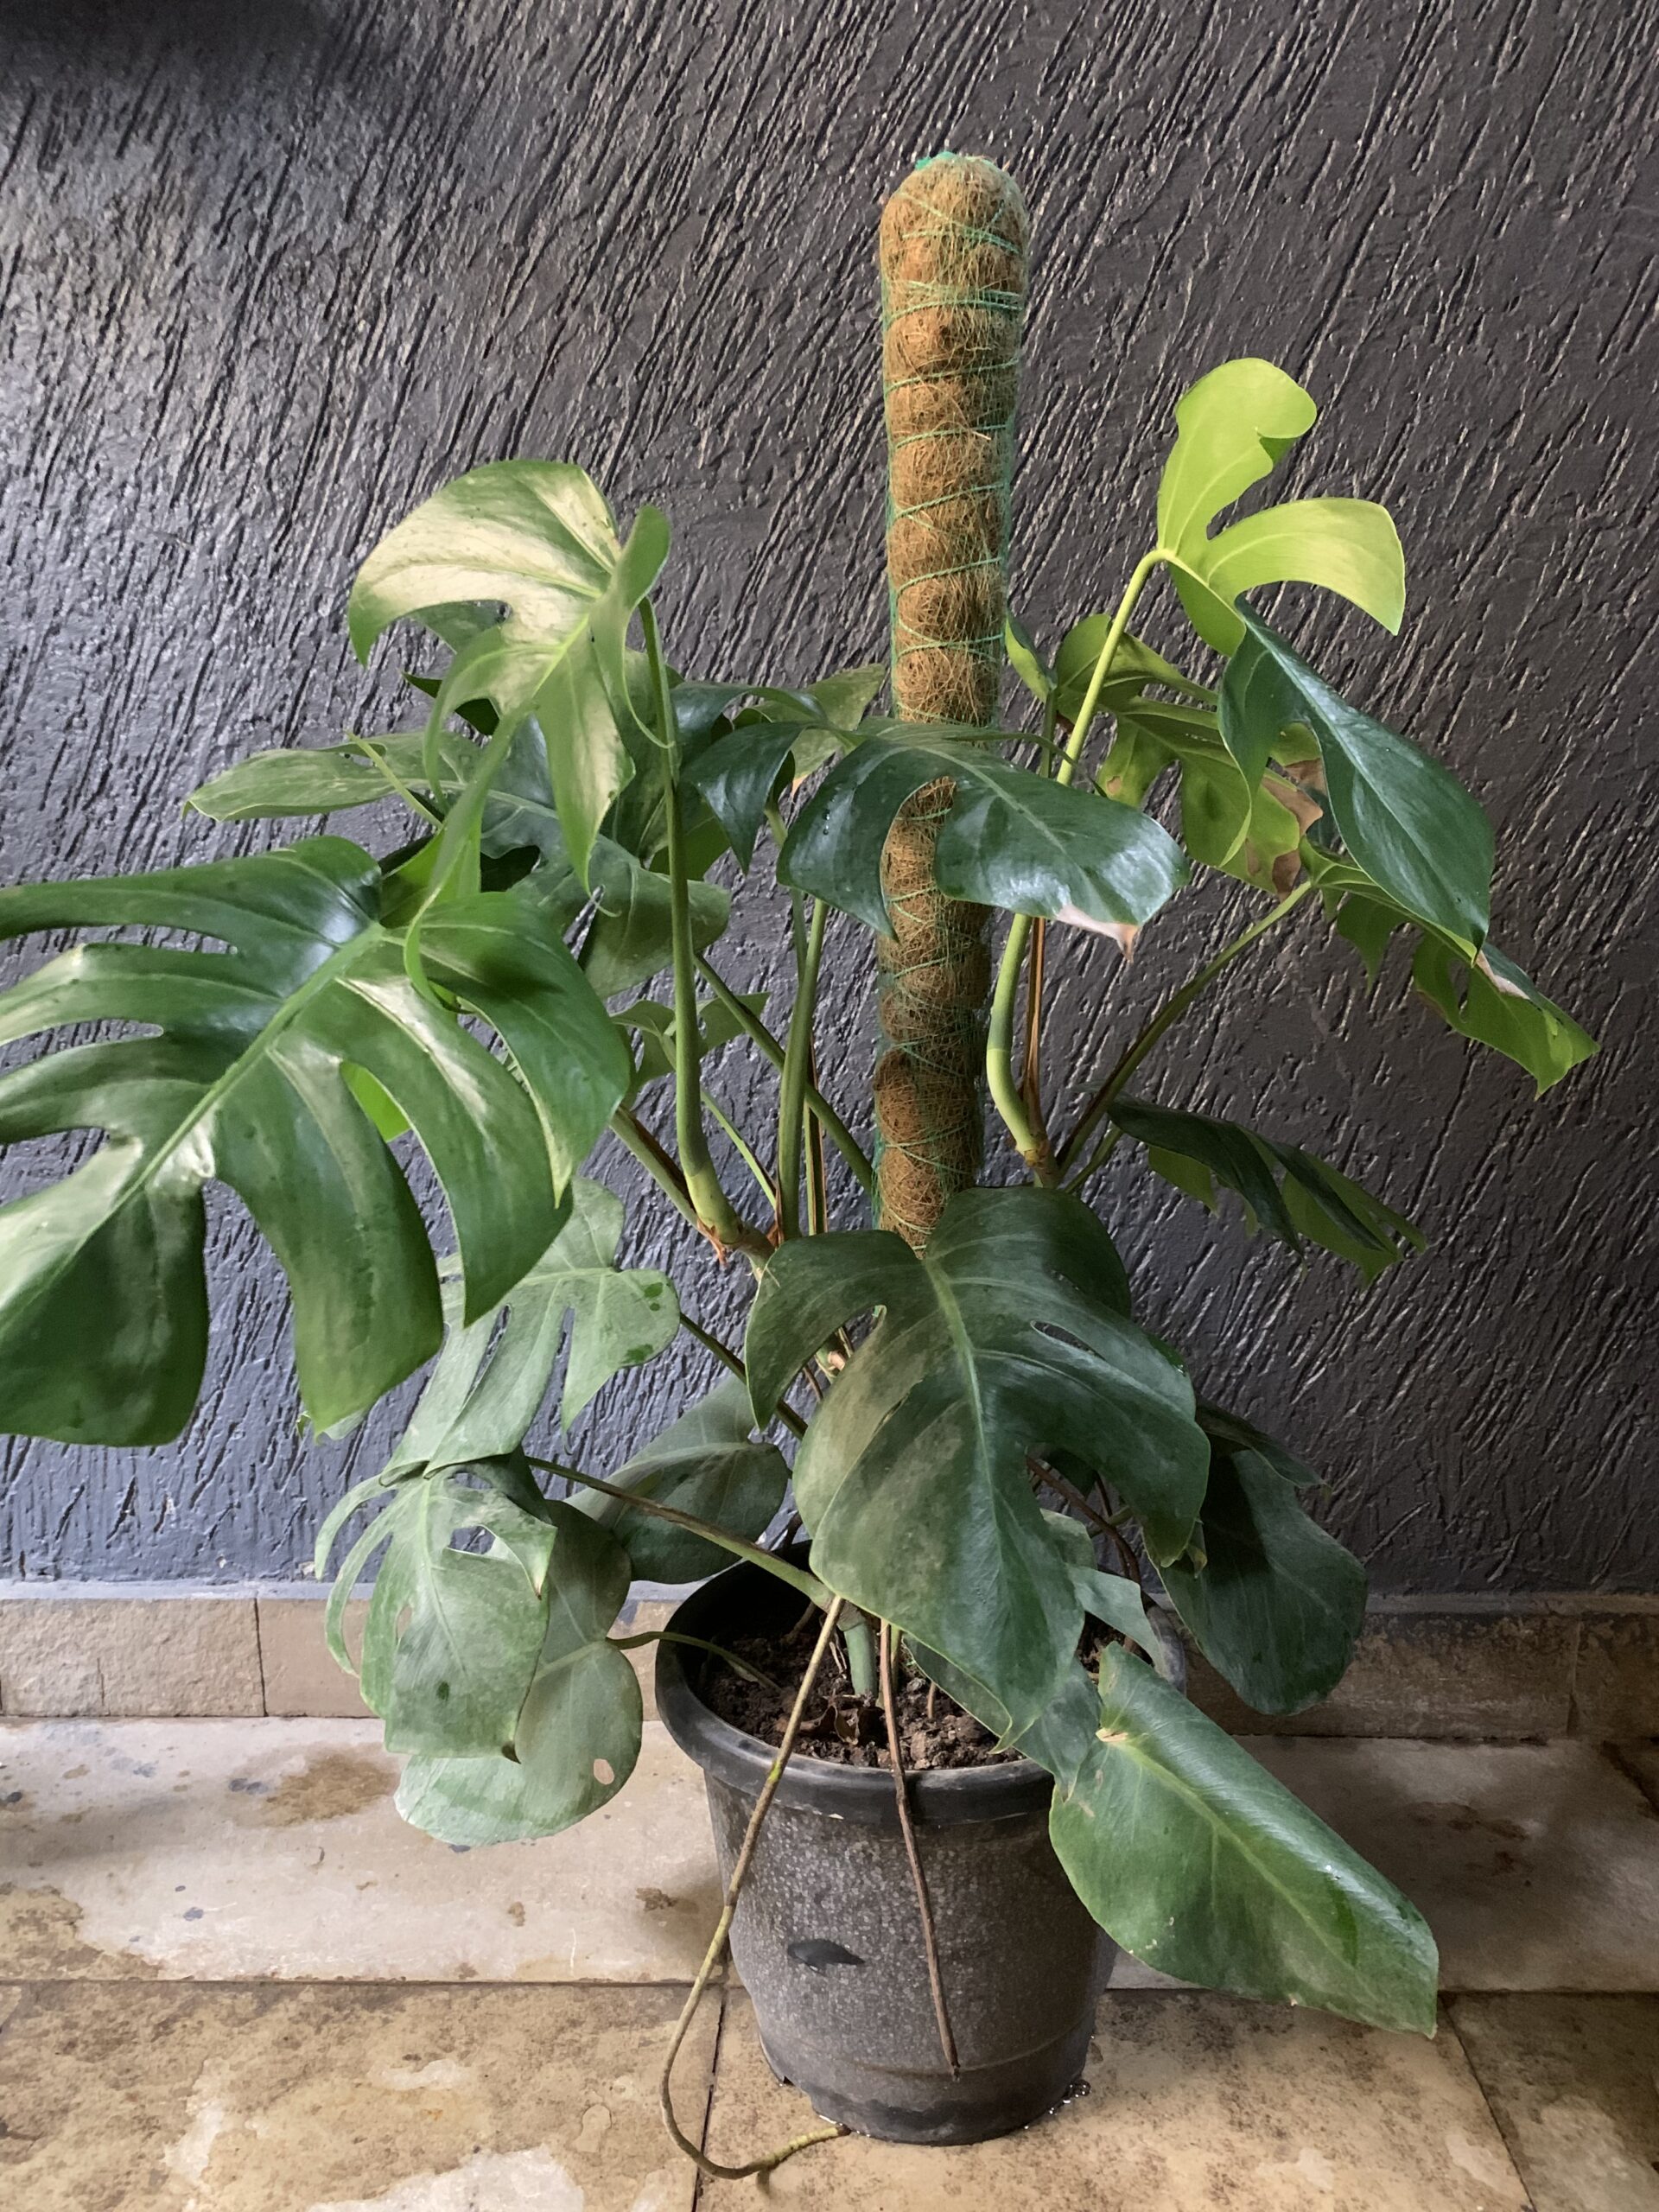 Thai Constellation Monstera - Live Plant in A 4 inch Nursery Pot - Monstera Deliciosa 'Thai Constellation' - Extremely Rare Indoor Houseplant